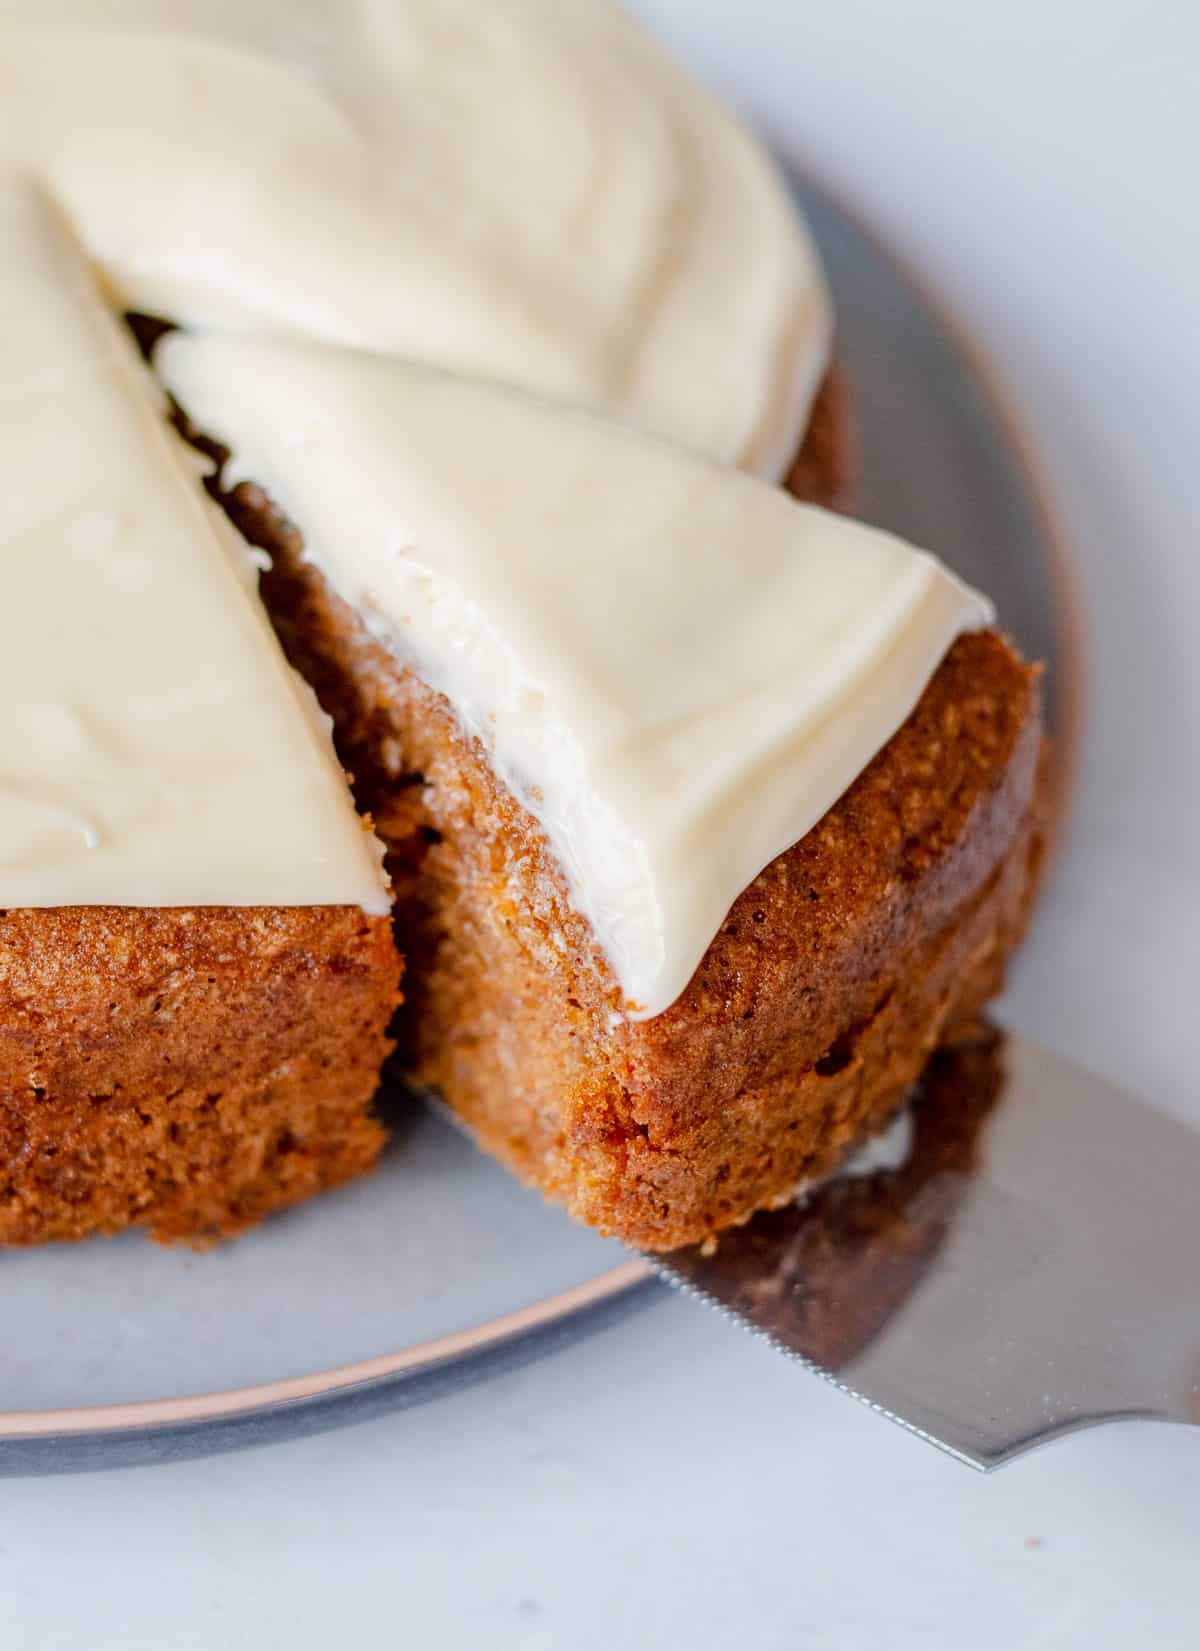 A slice of carrot cake with cream cheese icing.